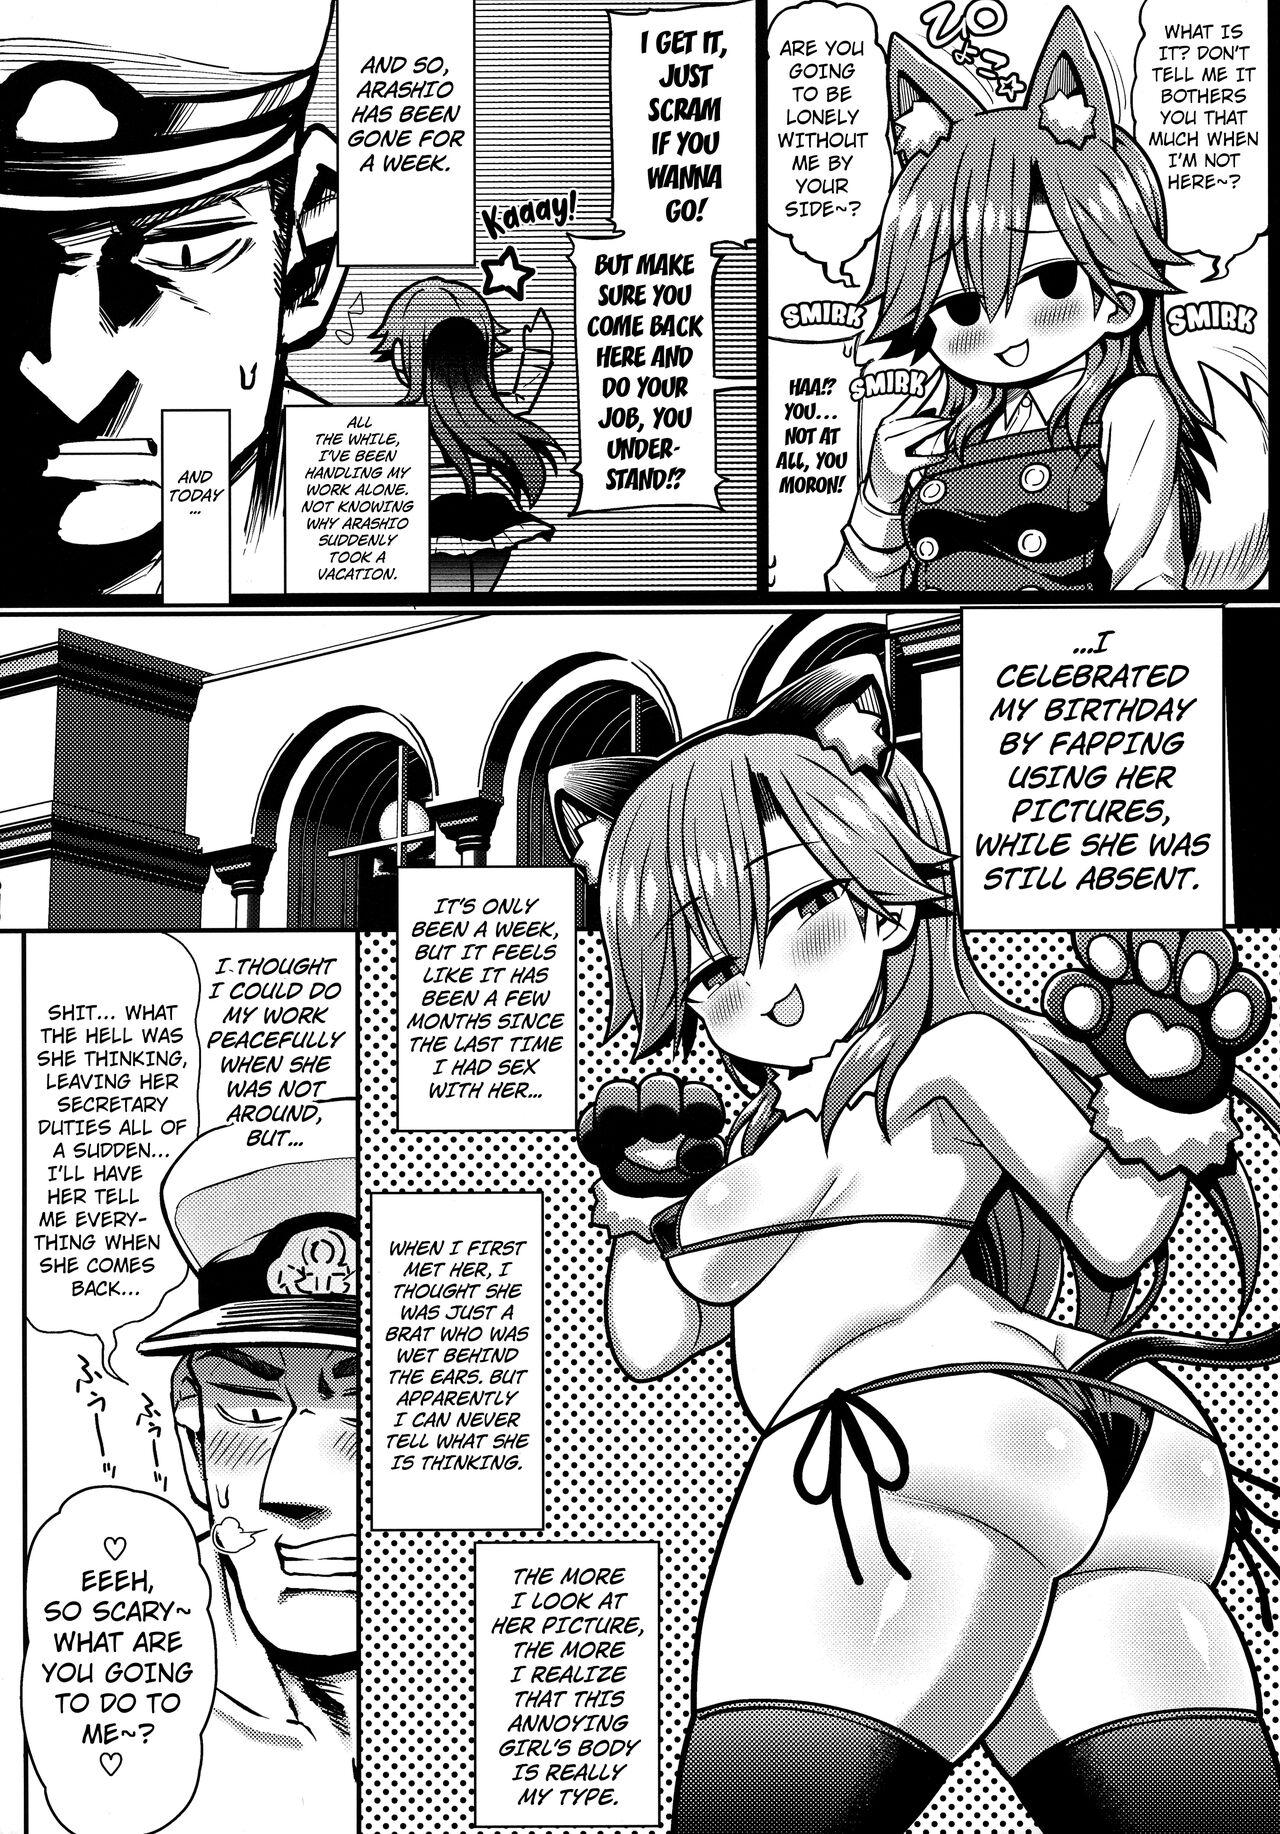 Oriental Omae no Sei dakara na! | It's Your Fault. You Know!? - Kantai collection Gagging - Page 5